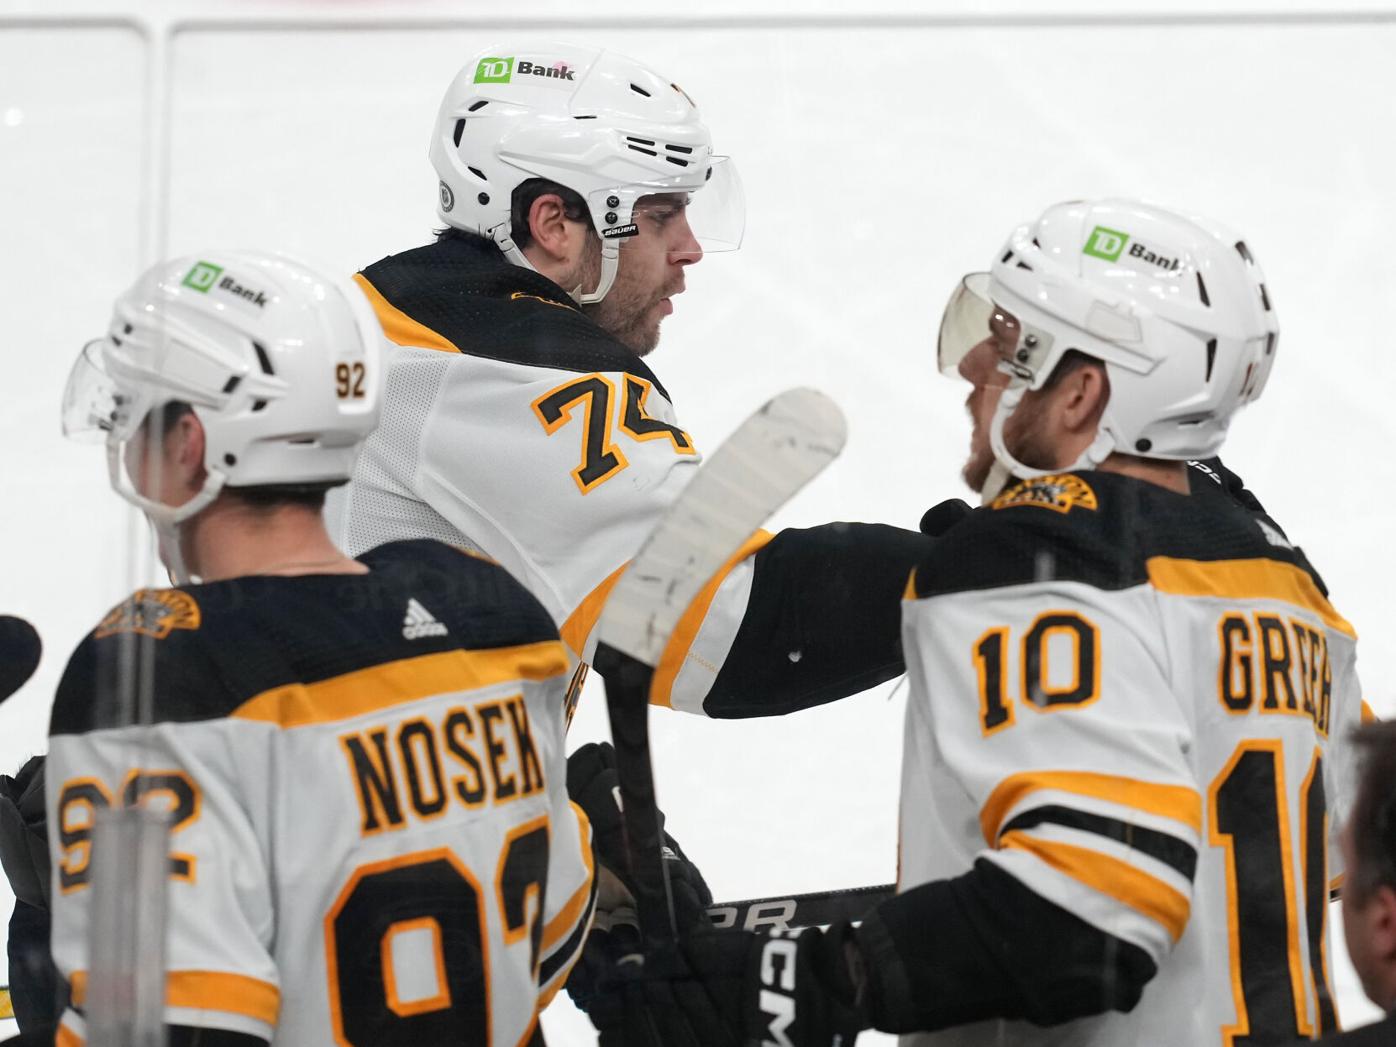 BSJ Game Report: Bruins 3, Golden Knights 1 - Reshuffled lineup lifts  Bruins to comeback win in Vegas